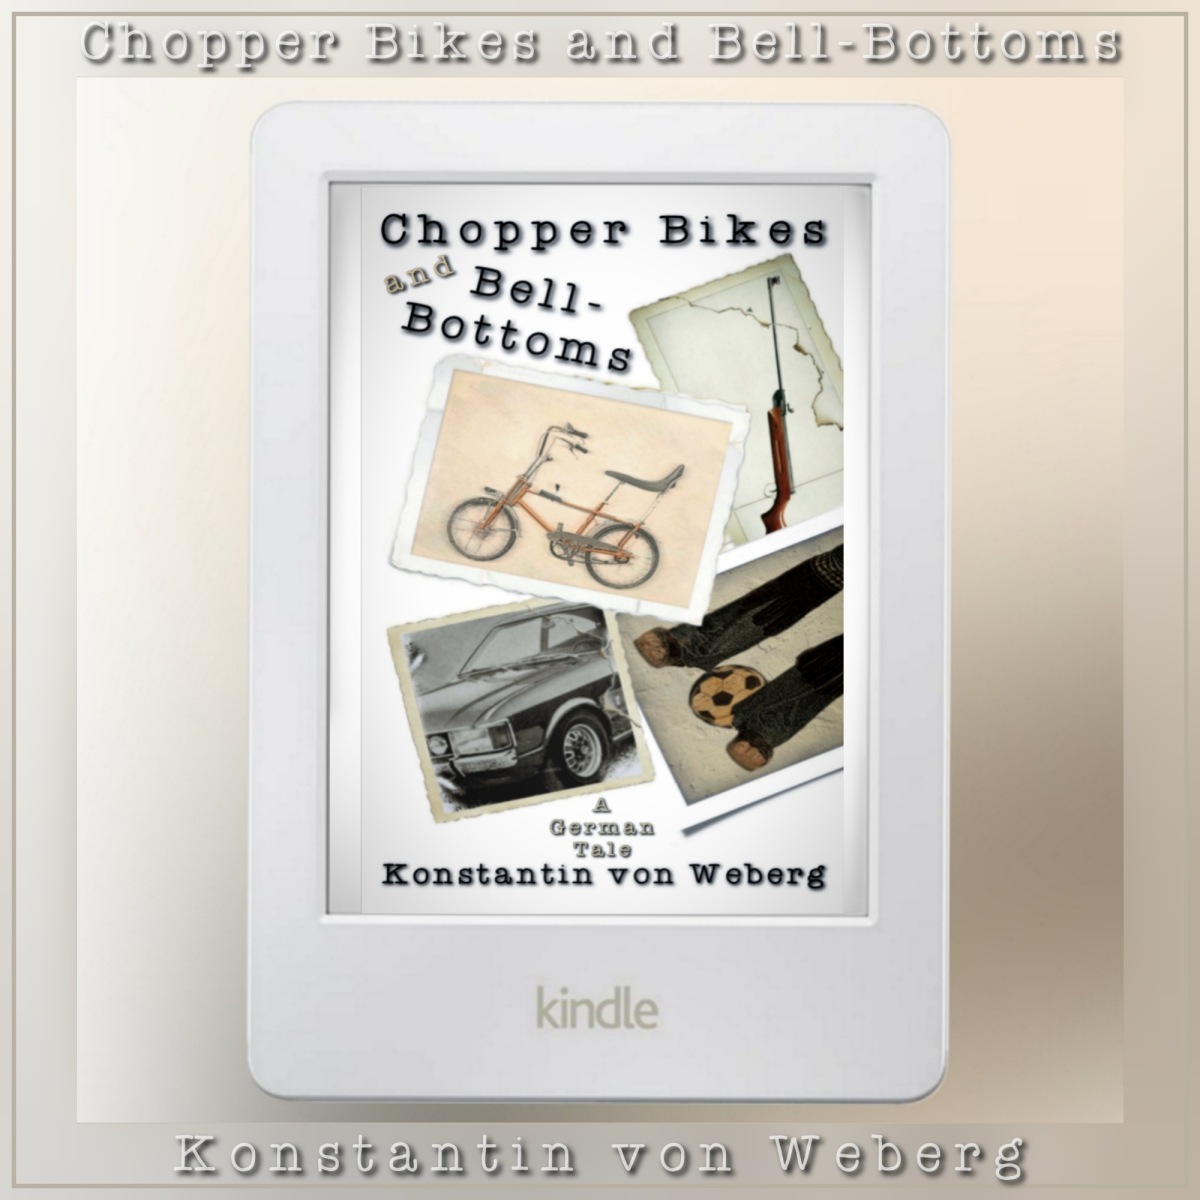 Watch the X-Ray in the Amazon Kindle eBook ‚Chopper Bikes and Bell-Bottoms‘ on YouTube. An ebook made with Love 💕